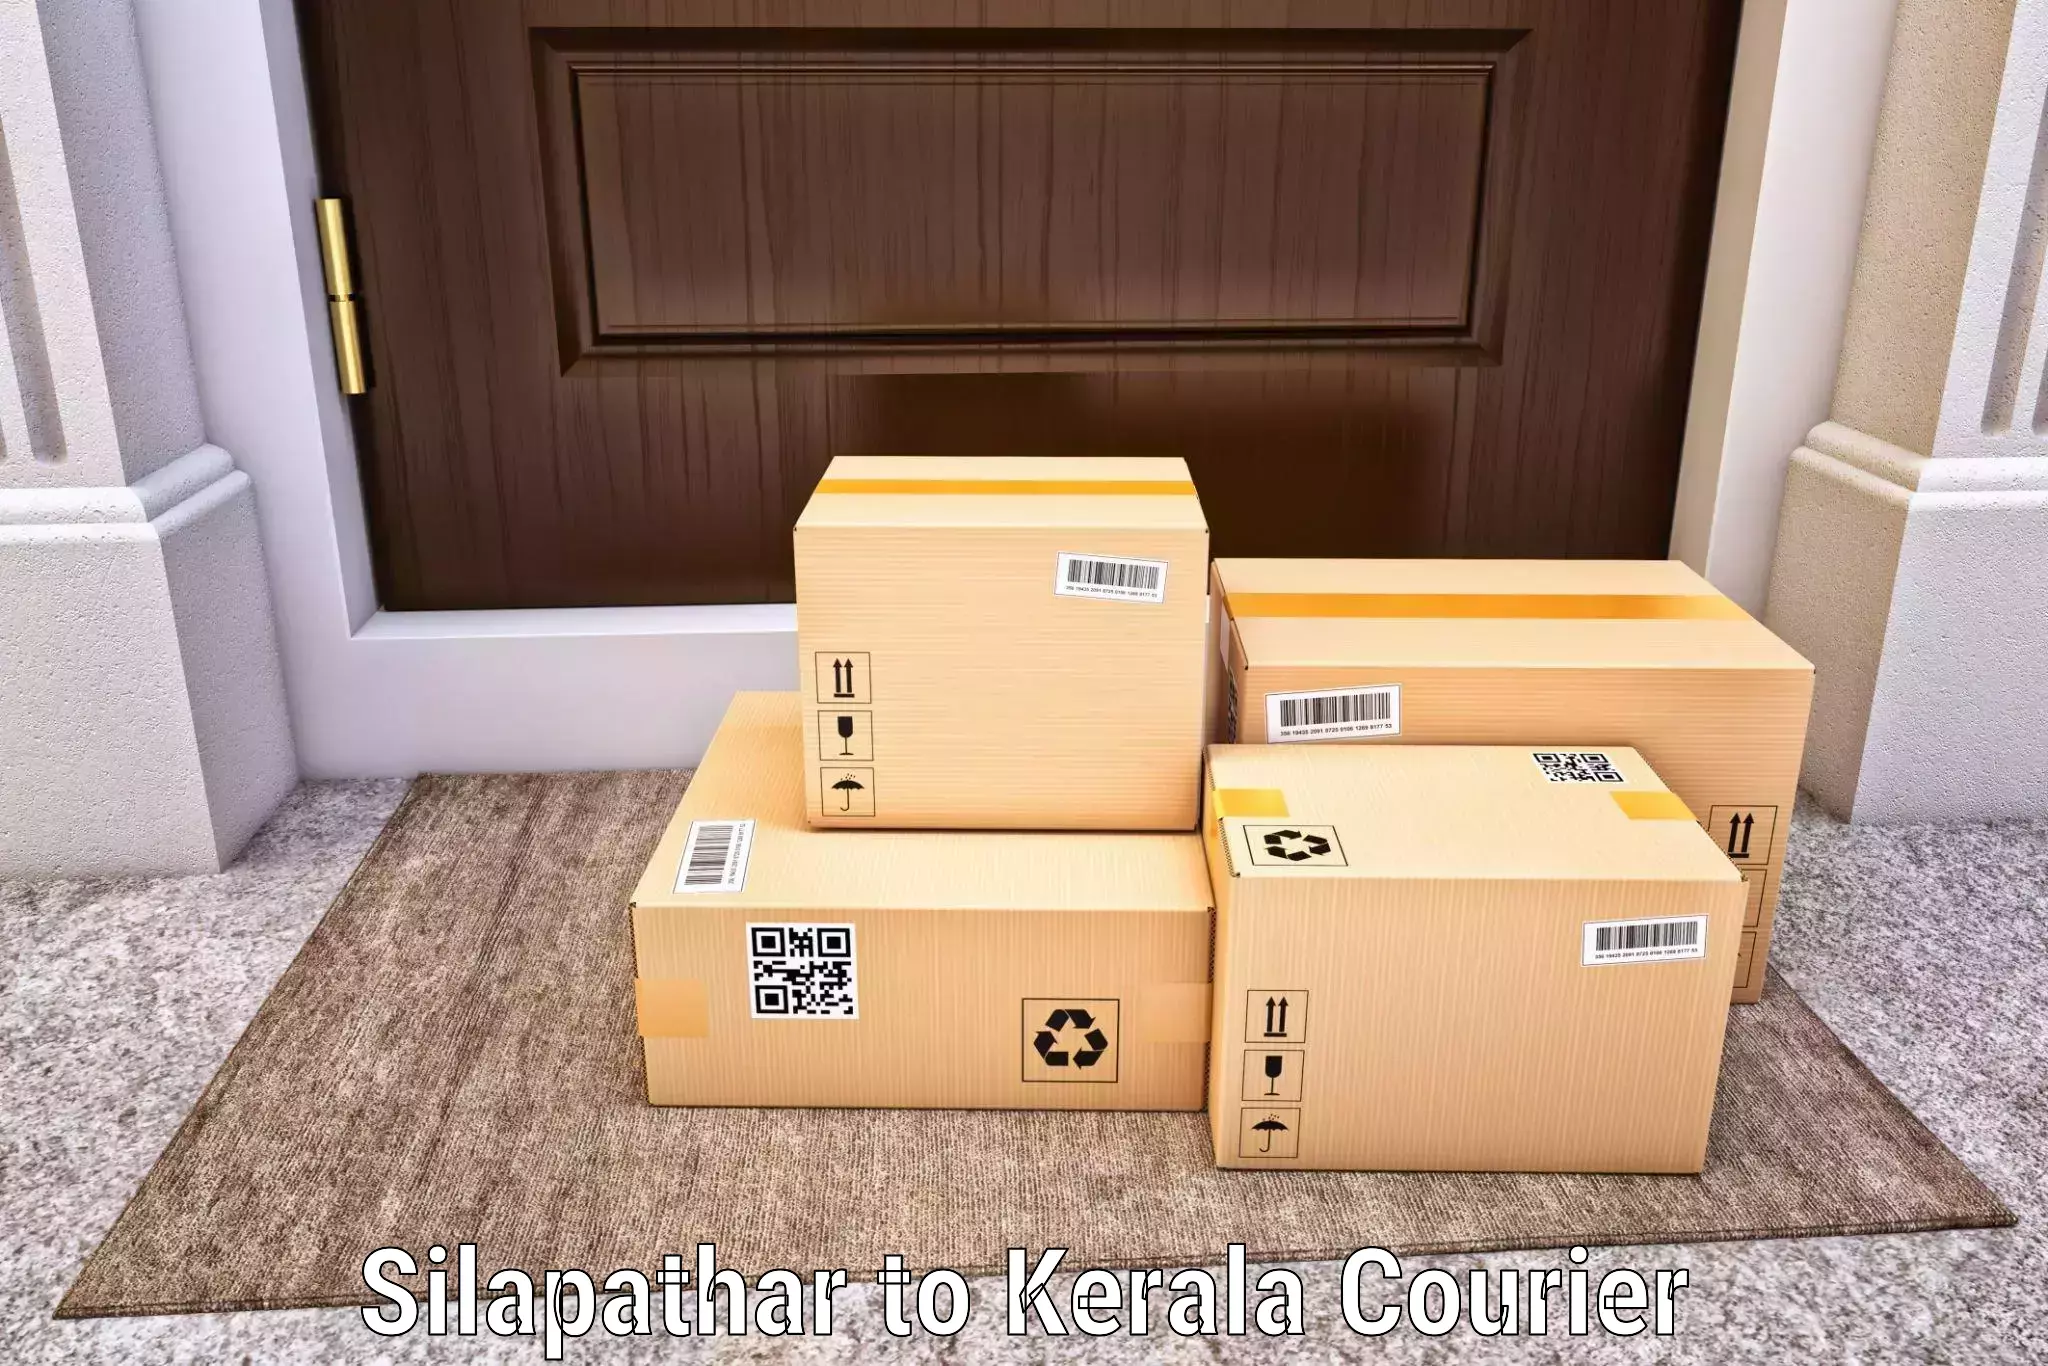 Package delivery network Silapathar to Akaloor